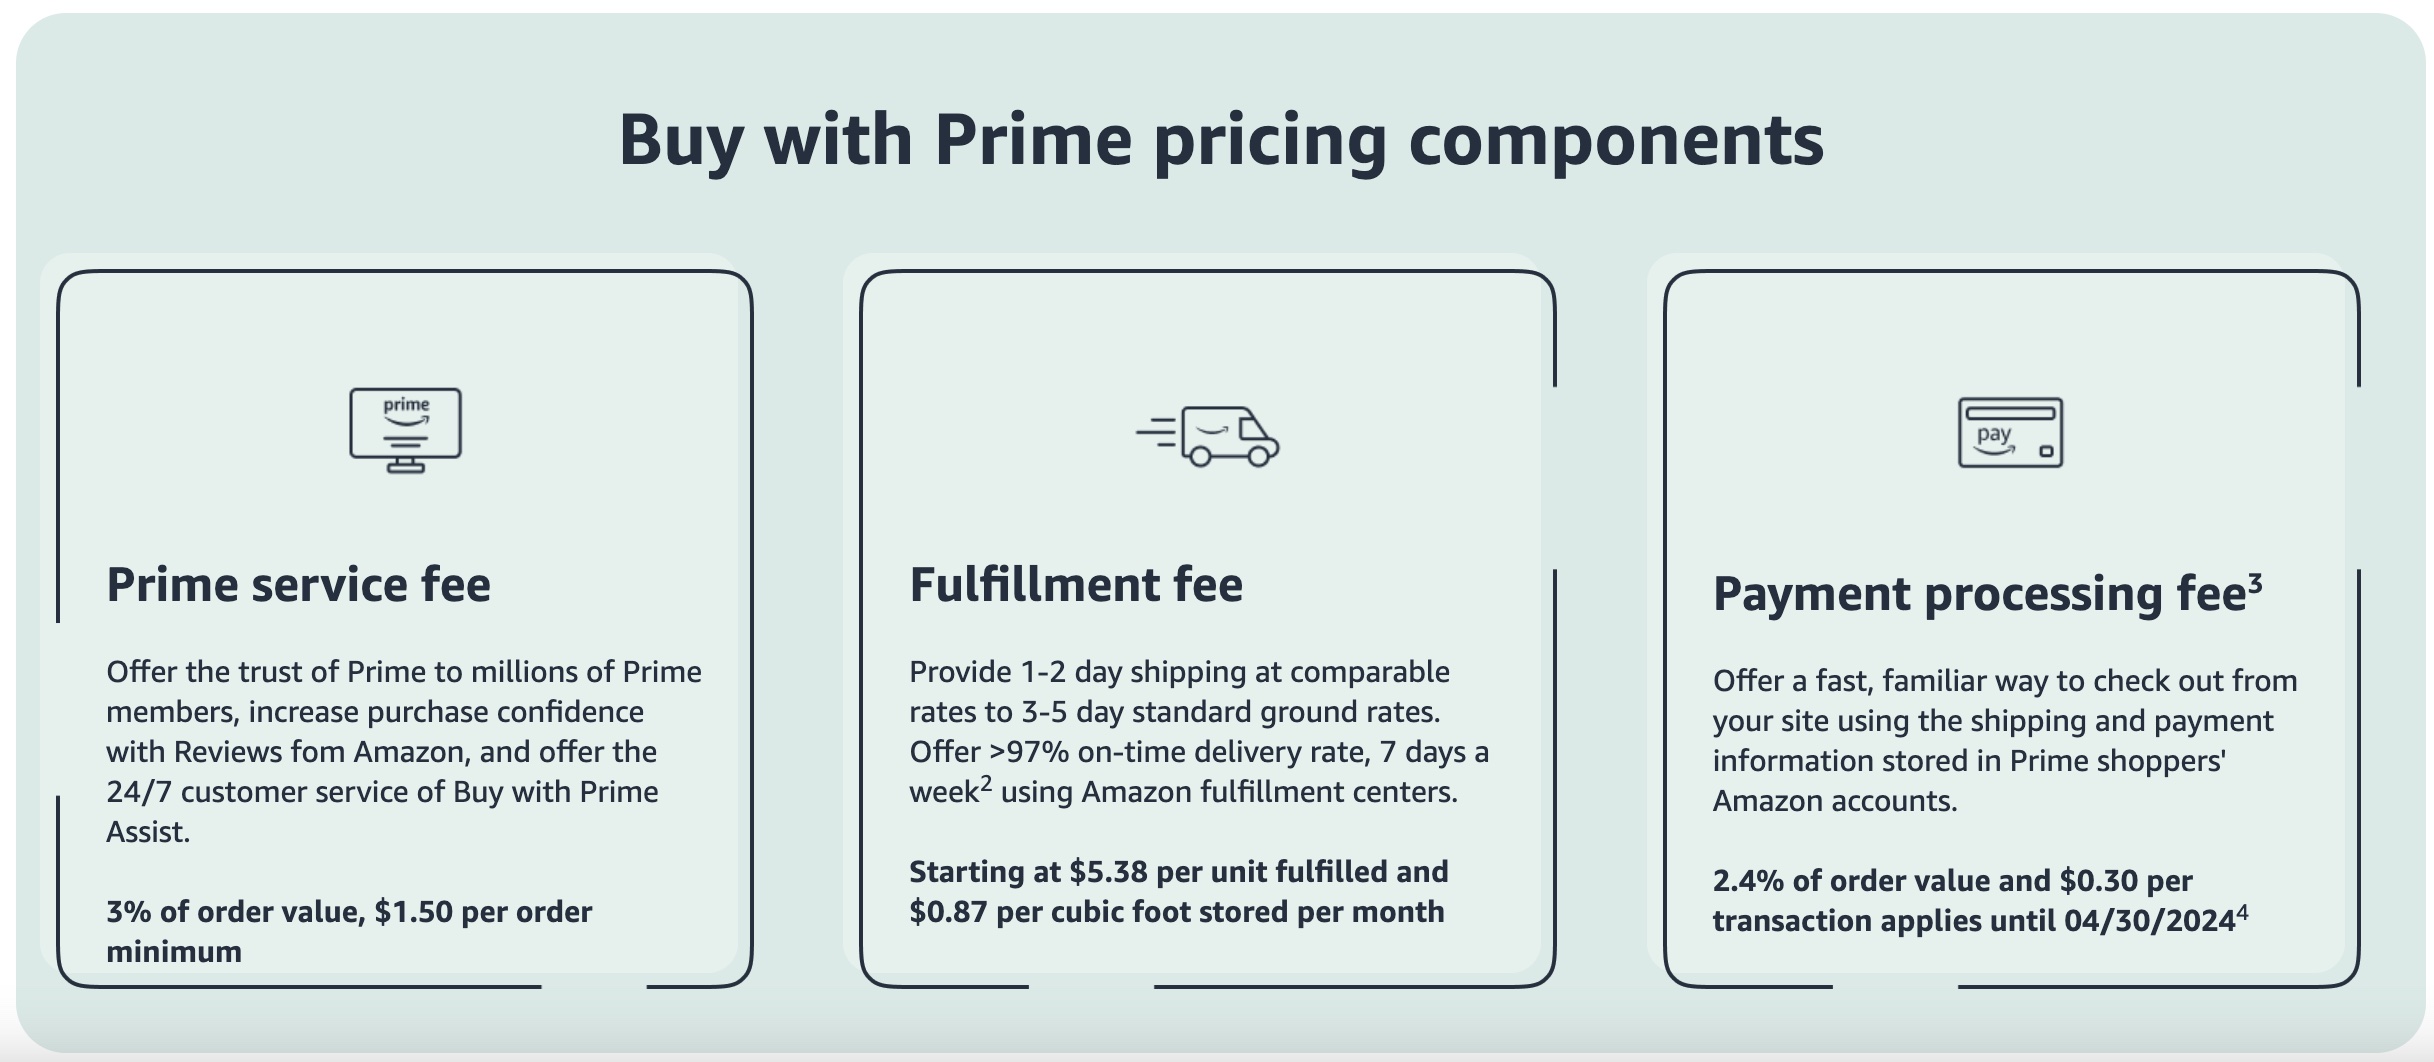 amazon_buy_with_prime_pricing.jpg